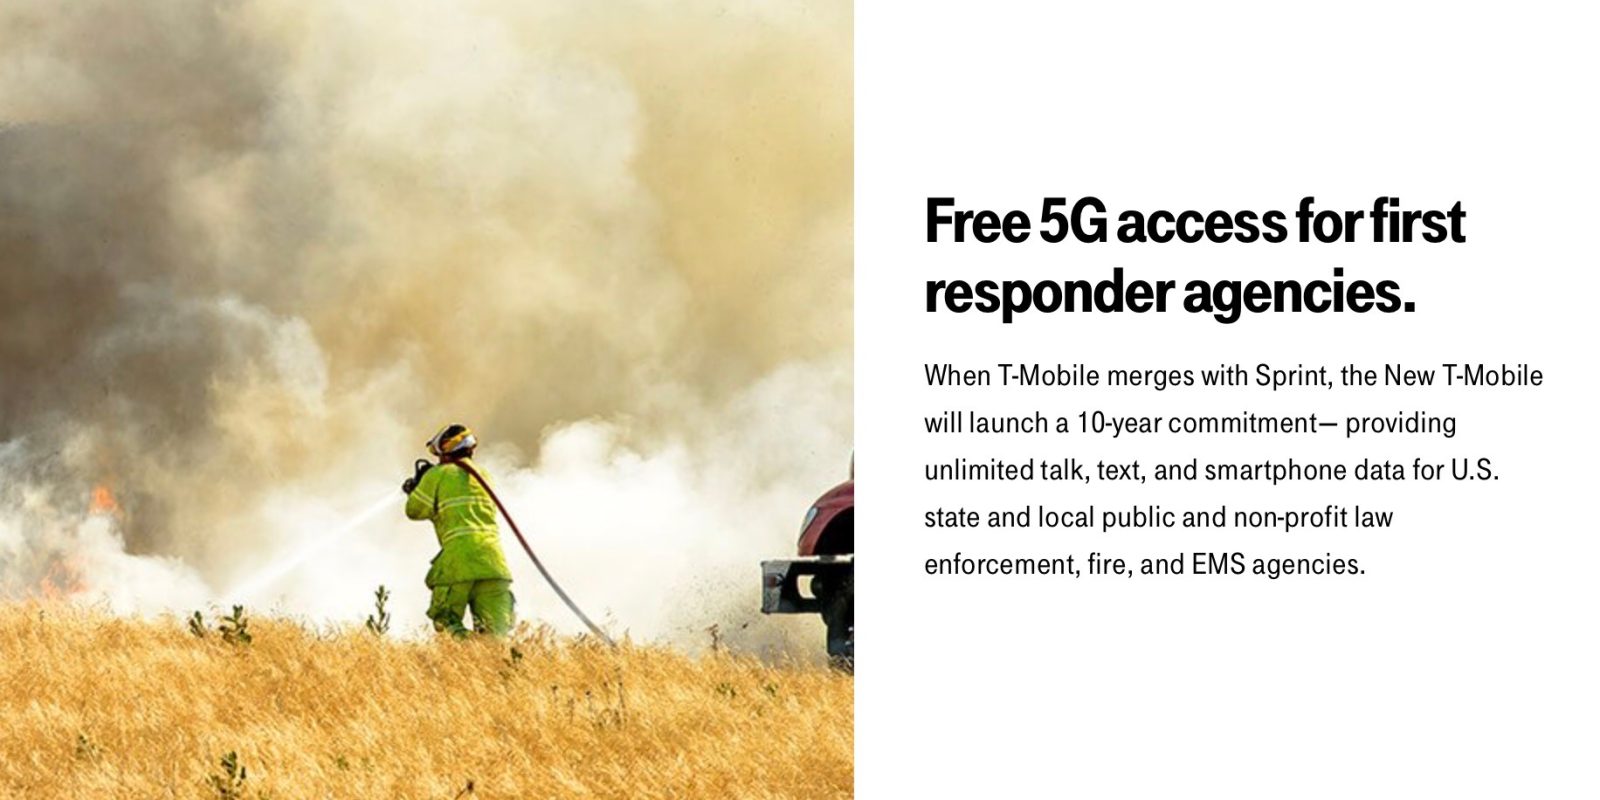 New T-Mobile 5G free first responders